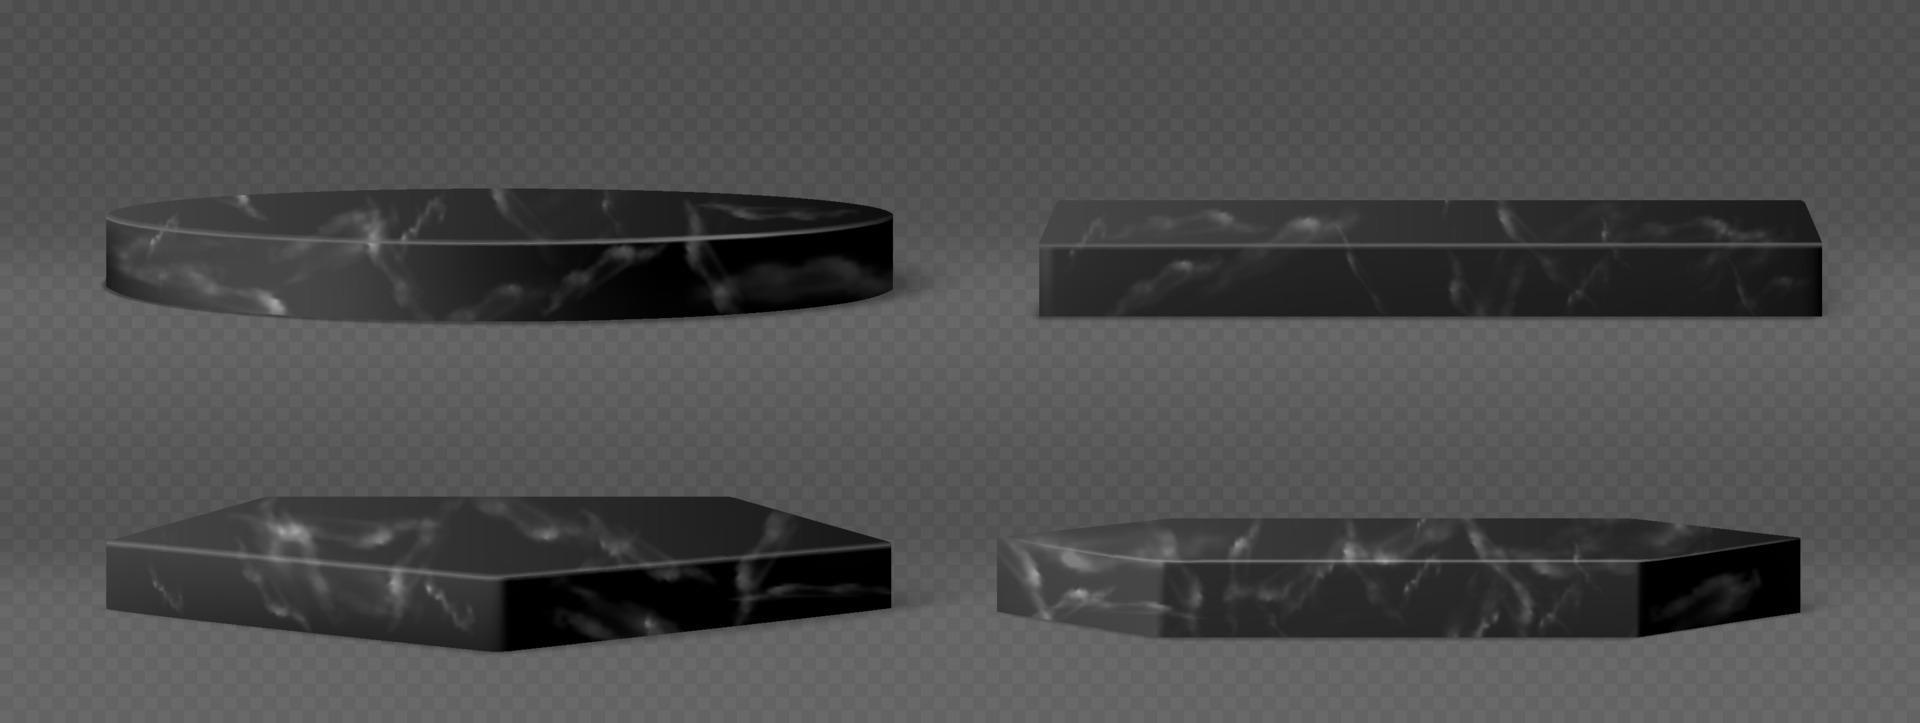 Black marble pedestals for display product vector